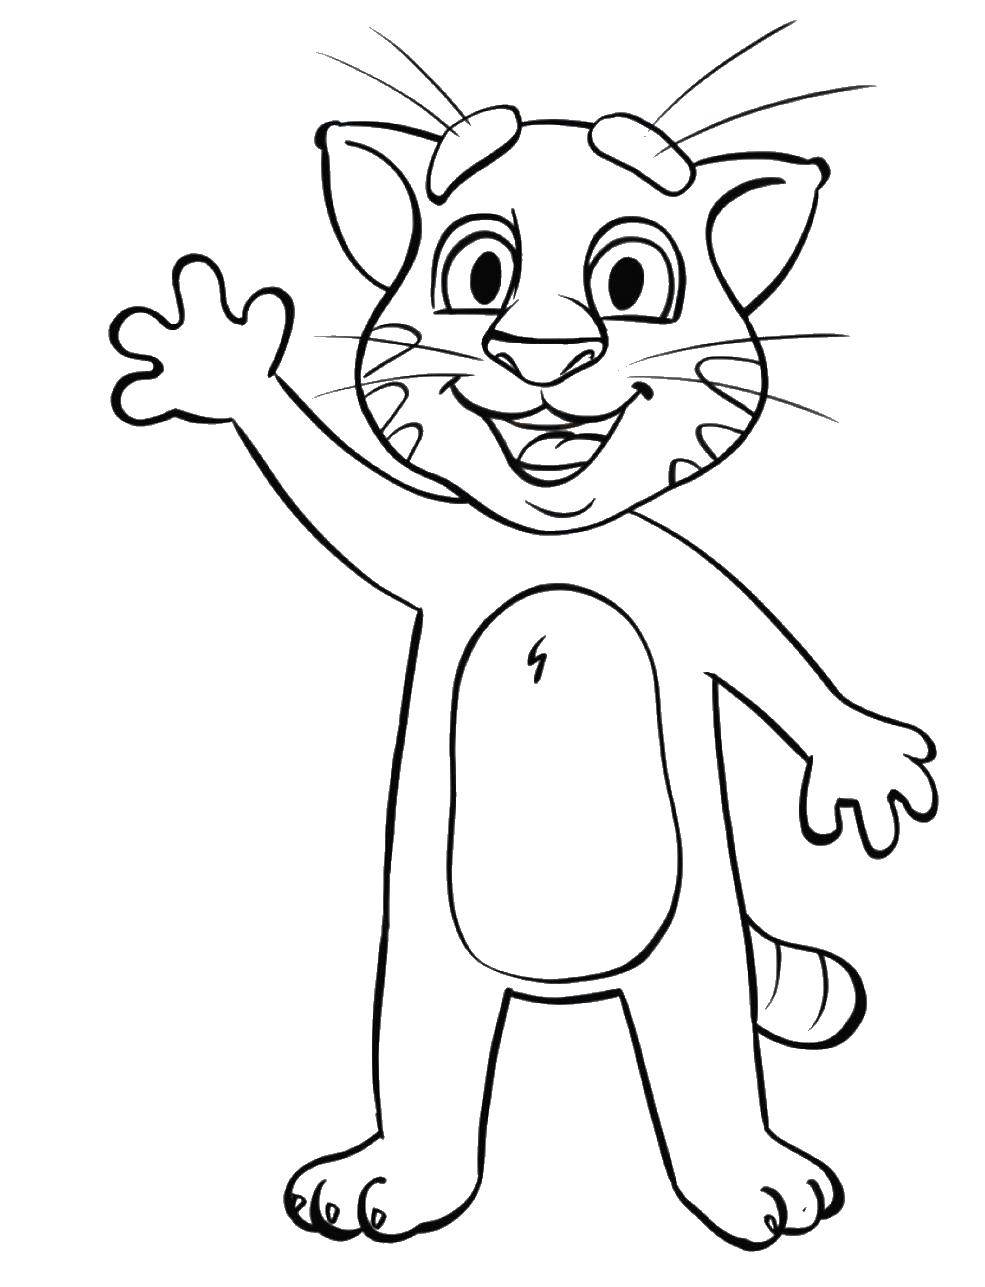 Coloring Cat Tom. Category coloring. Tags:  cartoons, Tom, cat.